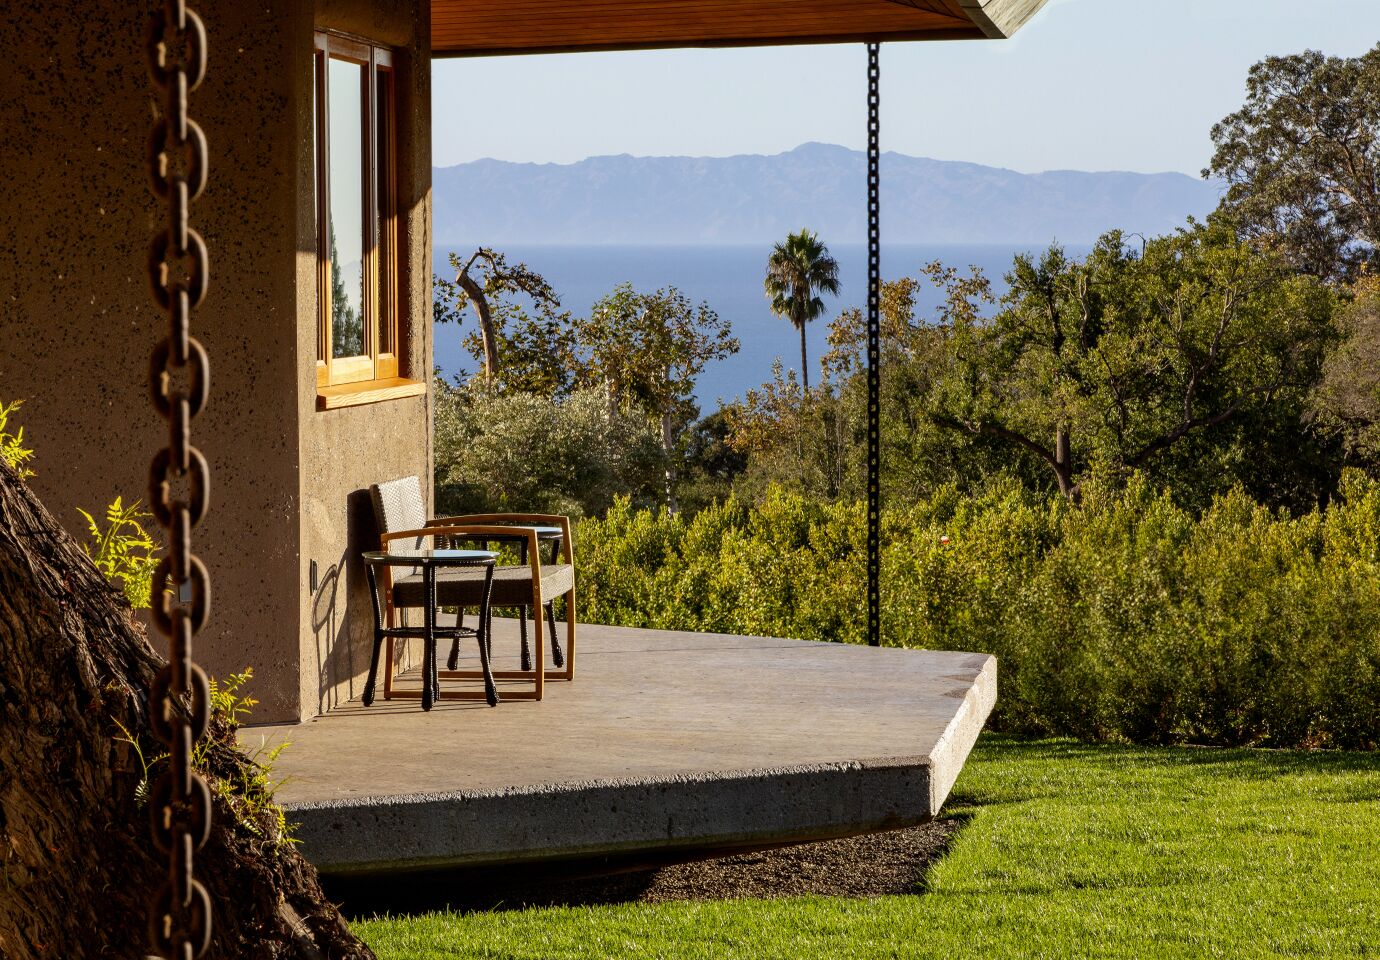 An outdoor patio provides a perch for taking in the scenery.